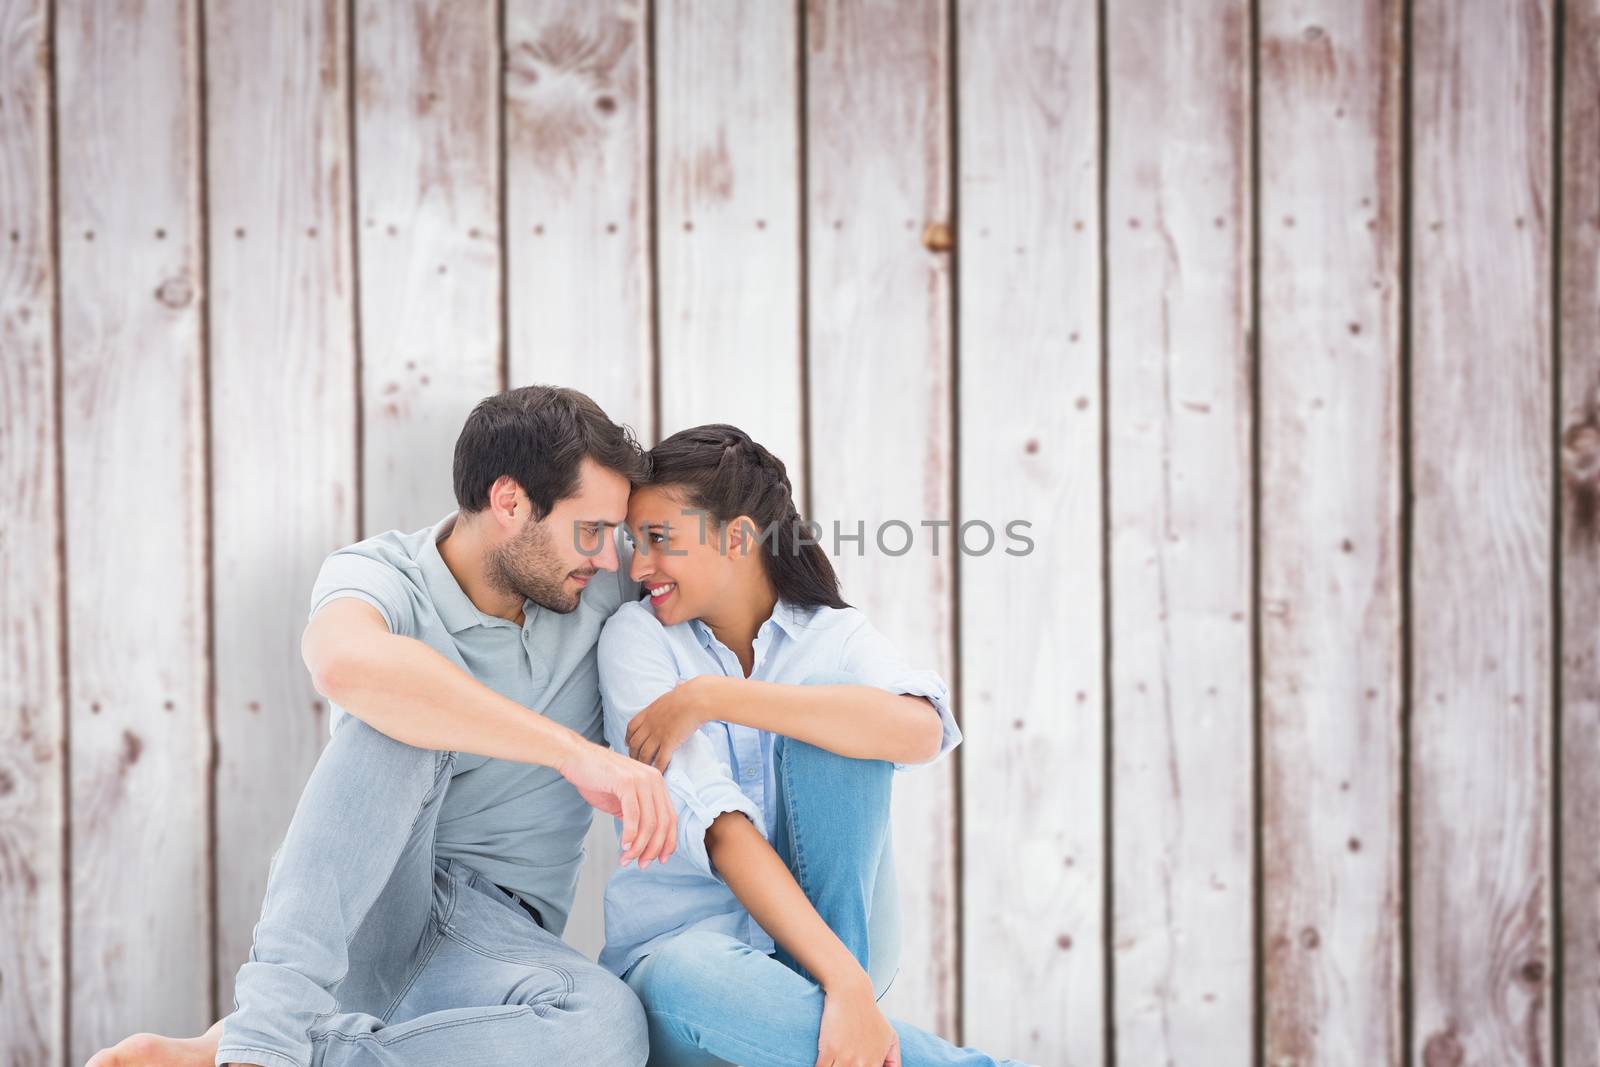 Cute couple sitting close together against wooden planks